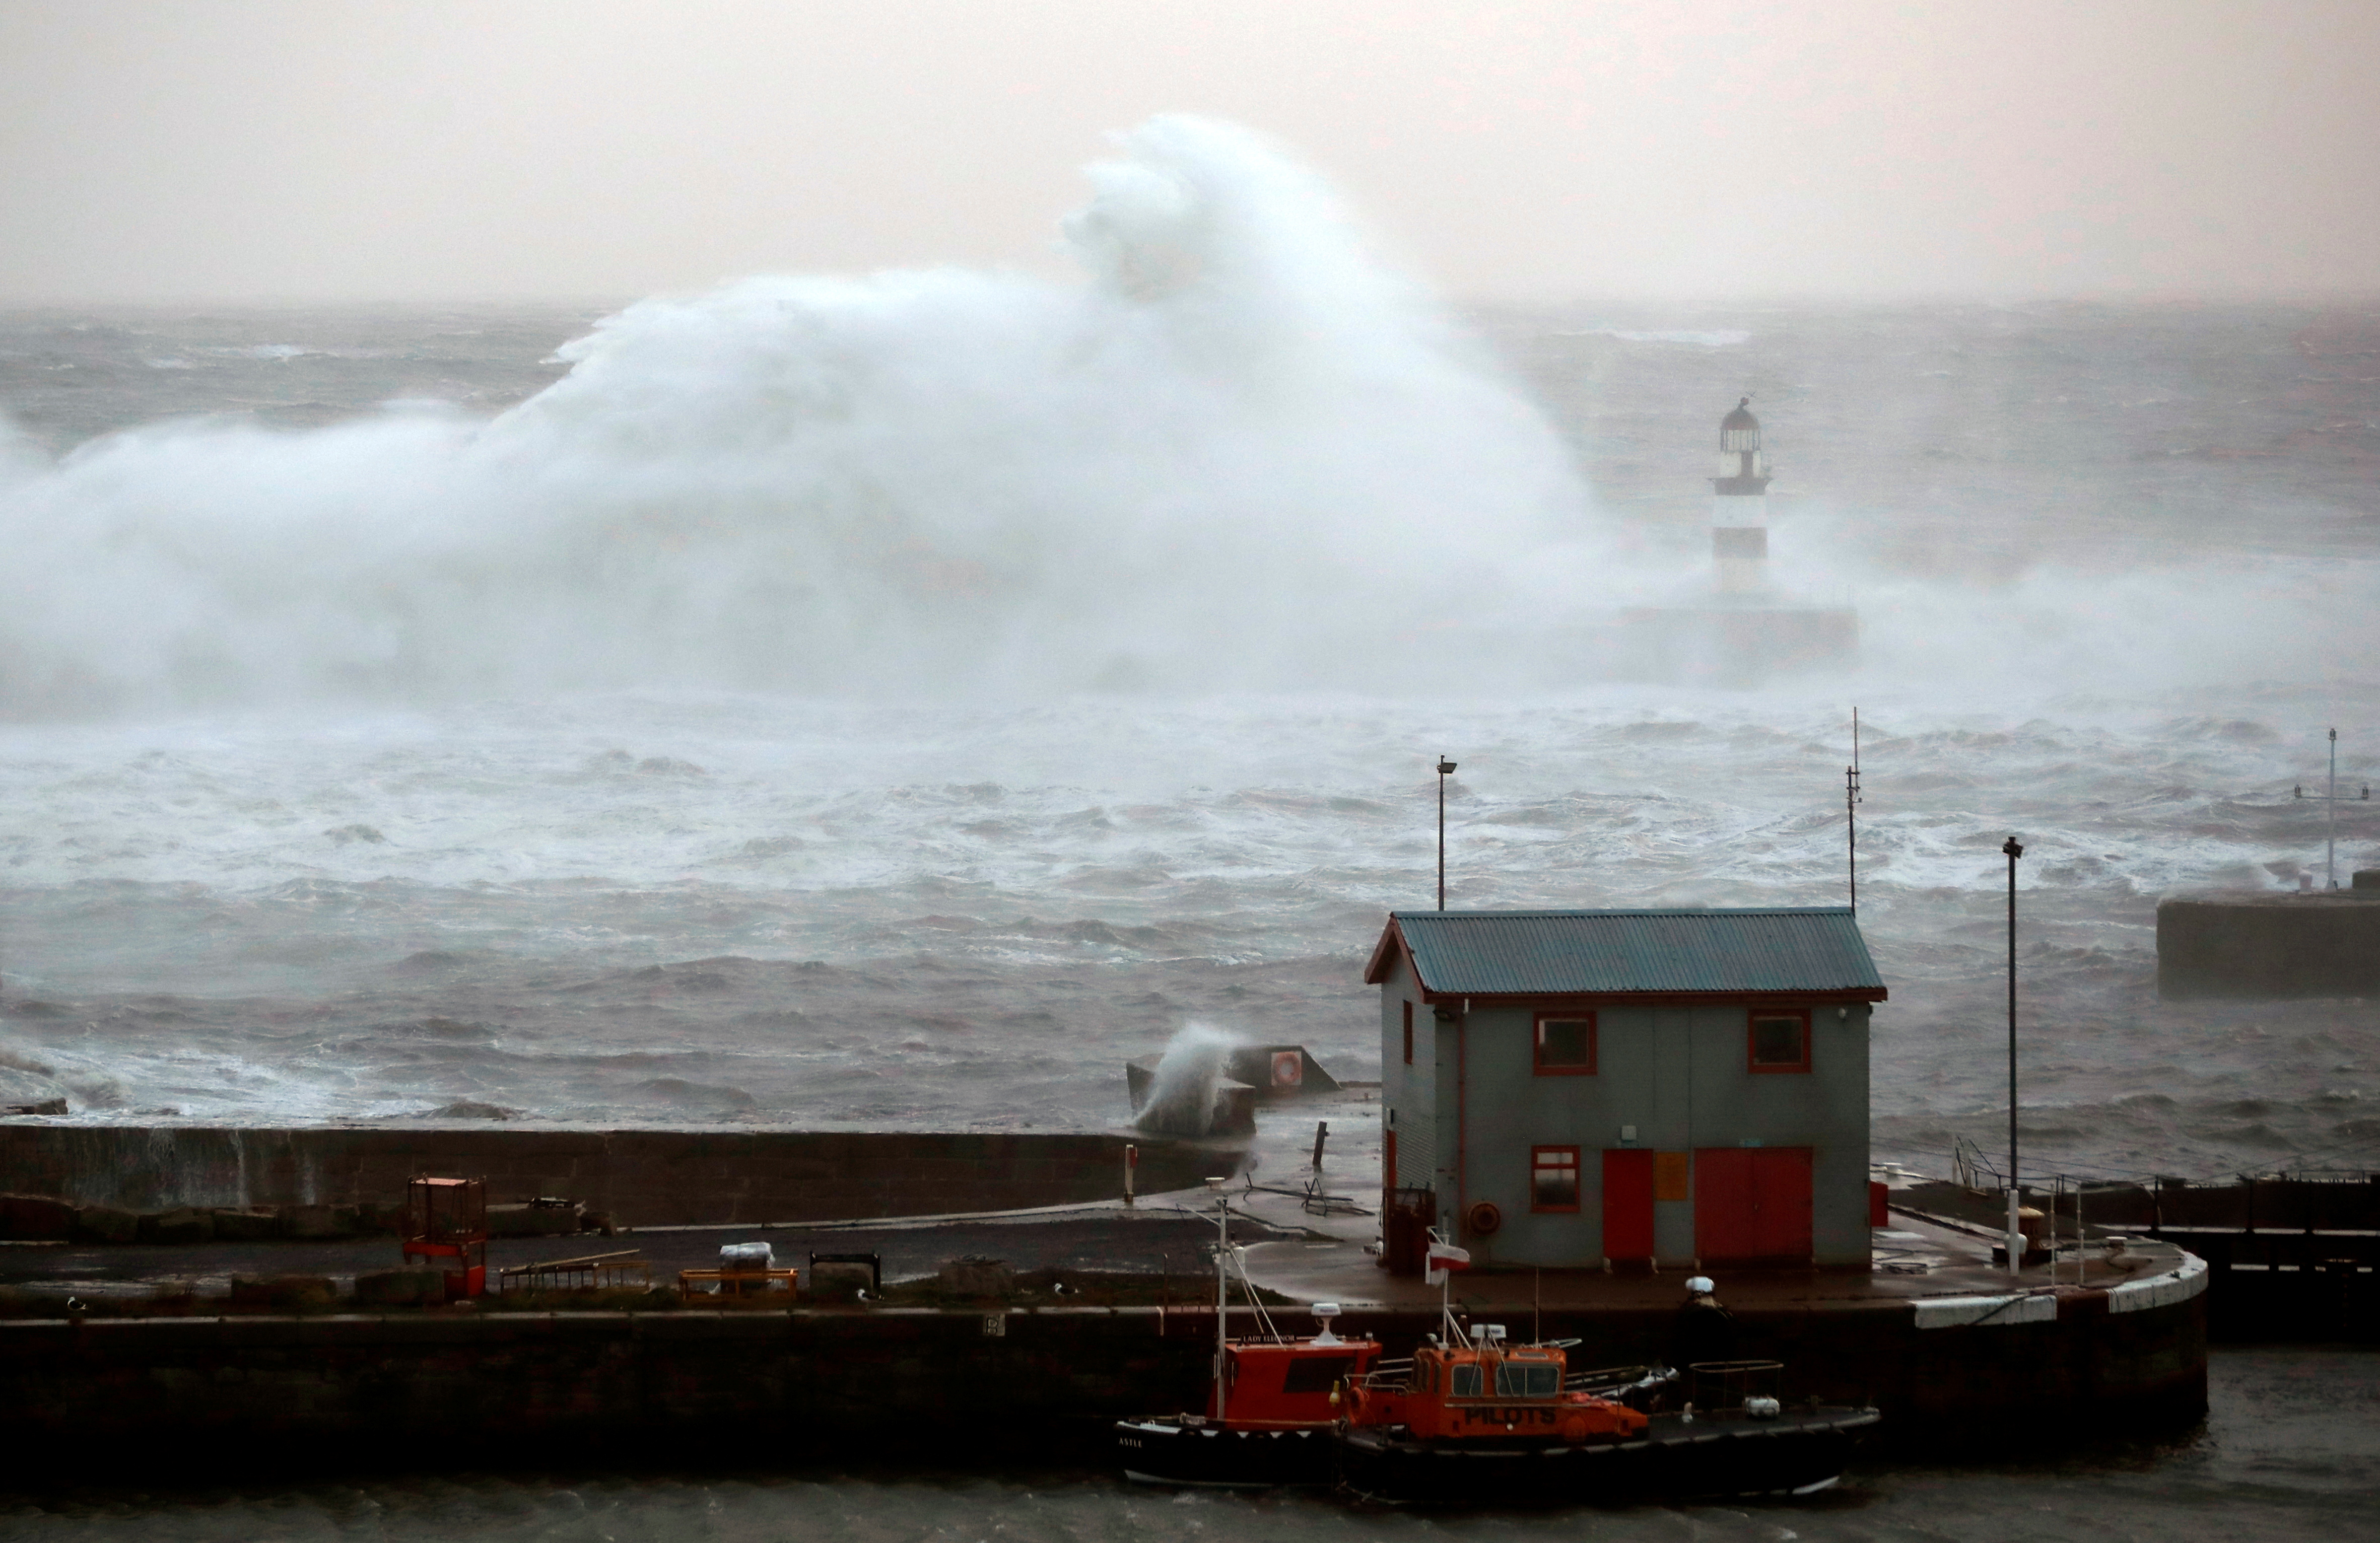 Waves crash against the pier wall at Seaham Lighthouse during Storm Arwen, in Seaham, Britain, November 27, 2021. REUTERS/Lee Smith